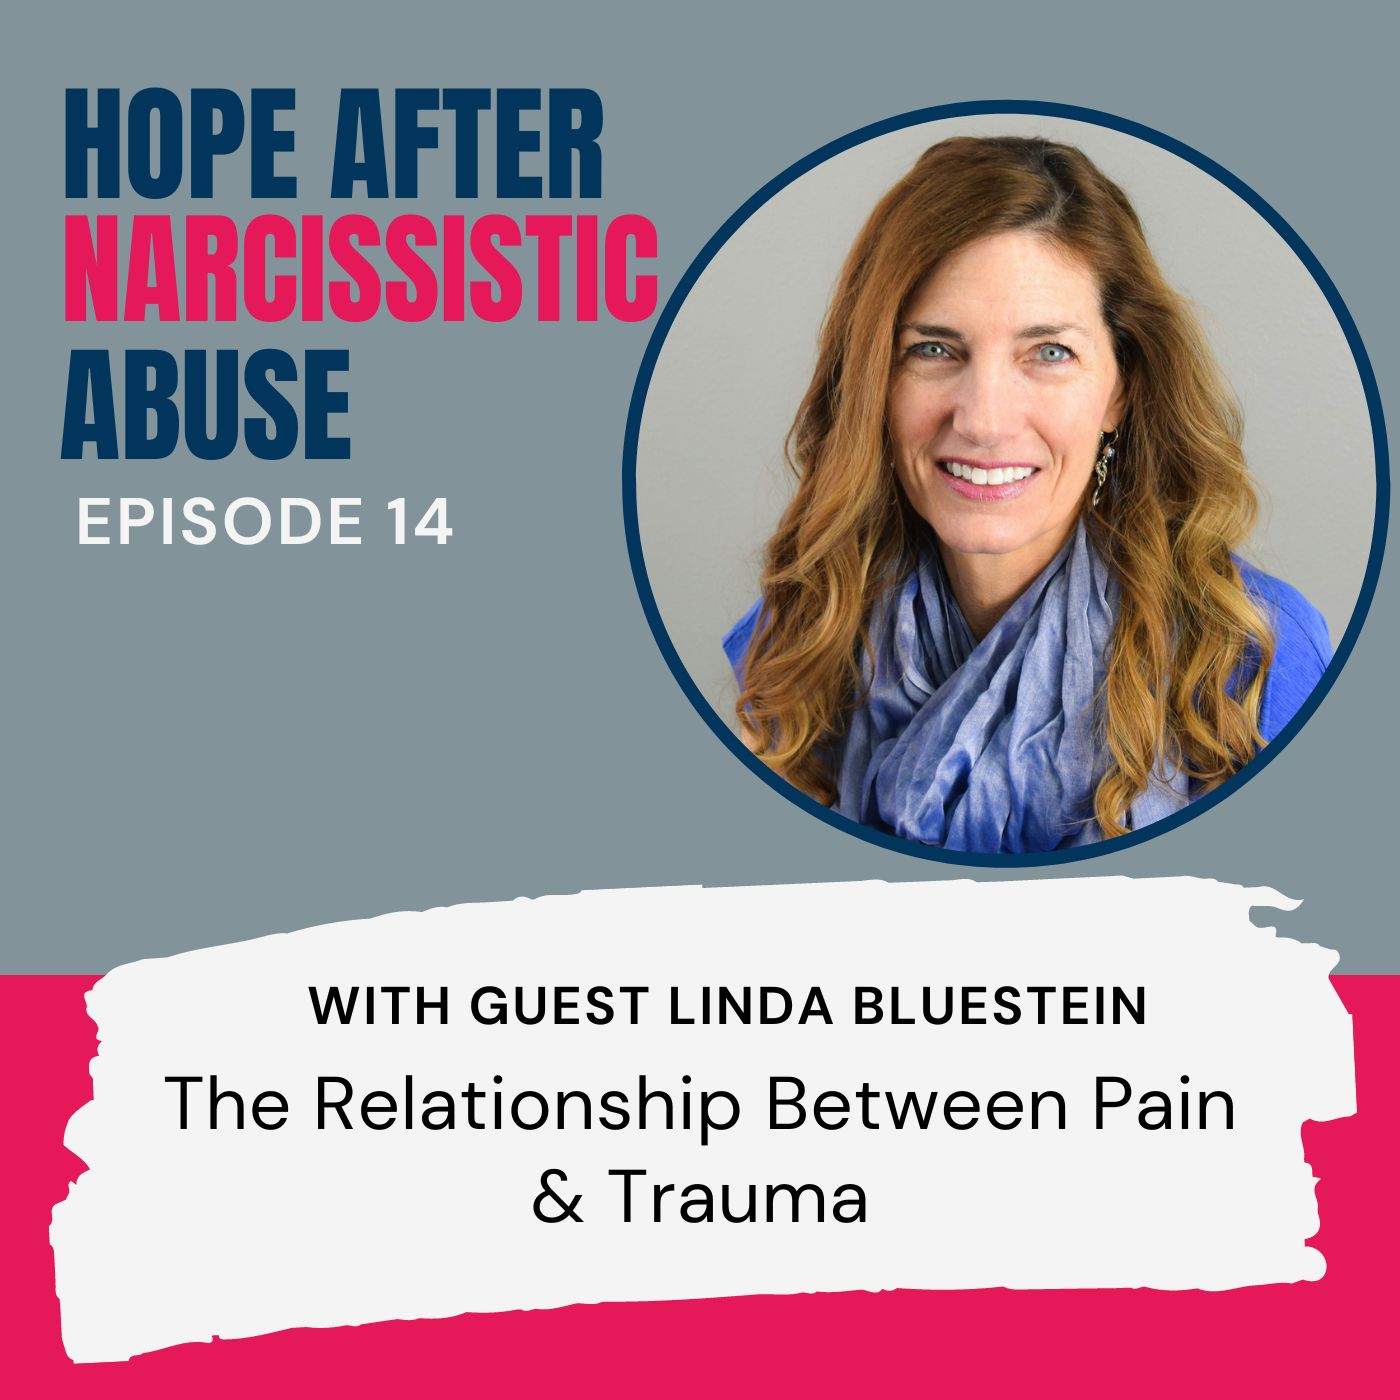 Learn about the relationship between pain and trauma with Linda Bluestein